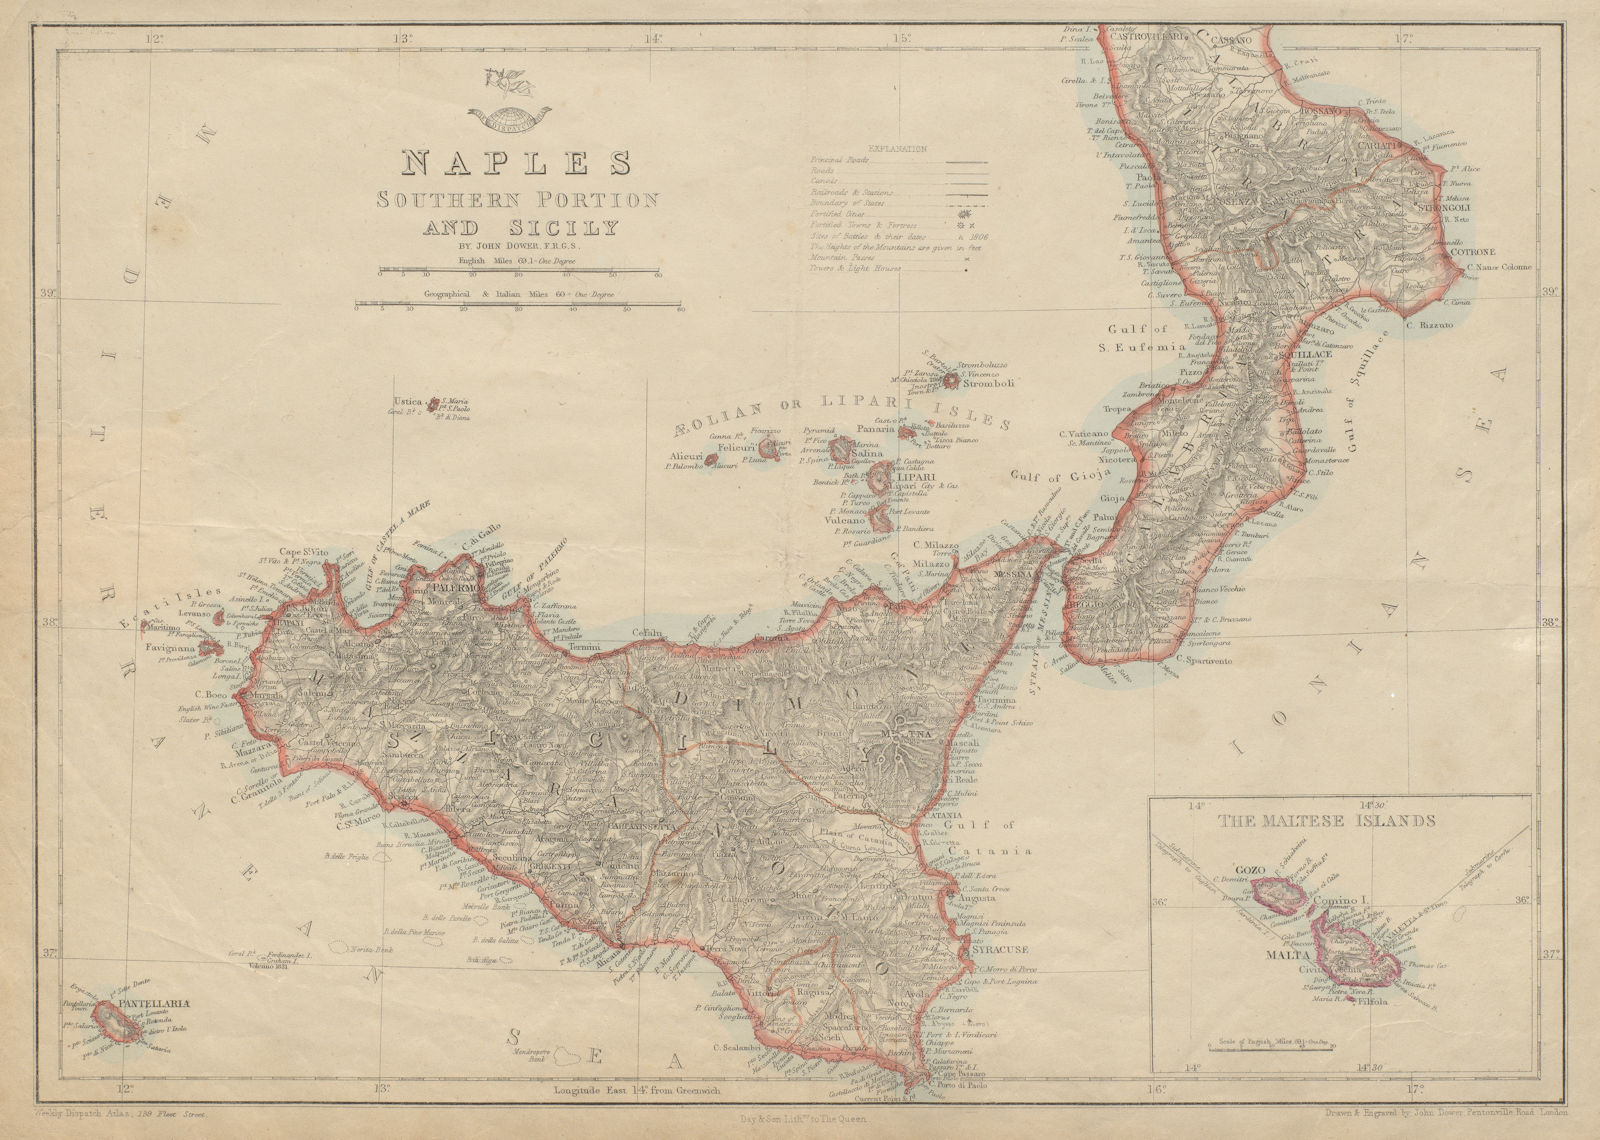 KINGDOM OF NAPLES/TWO SICILIES South. Sicily Malta Italy. DOWER 1862 old map